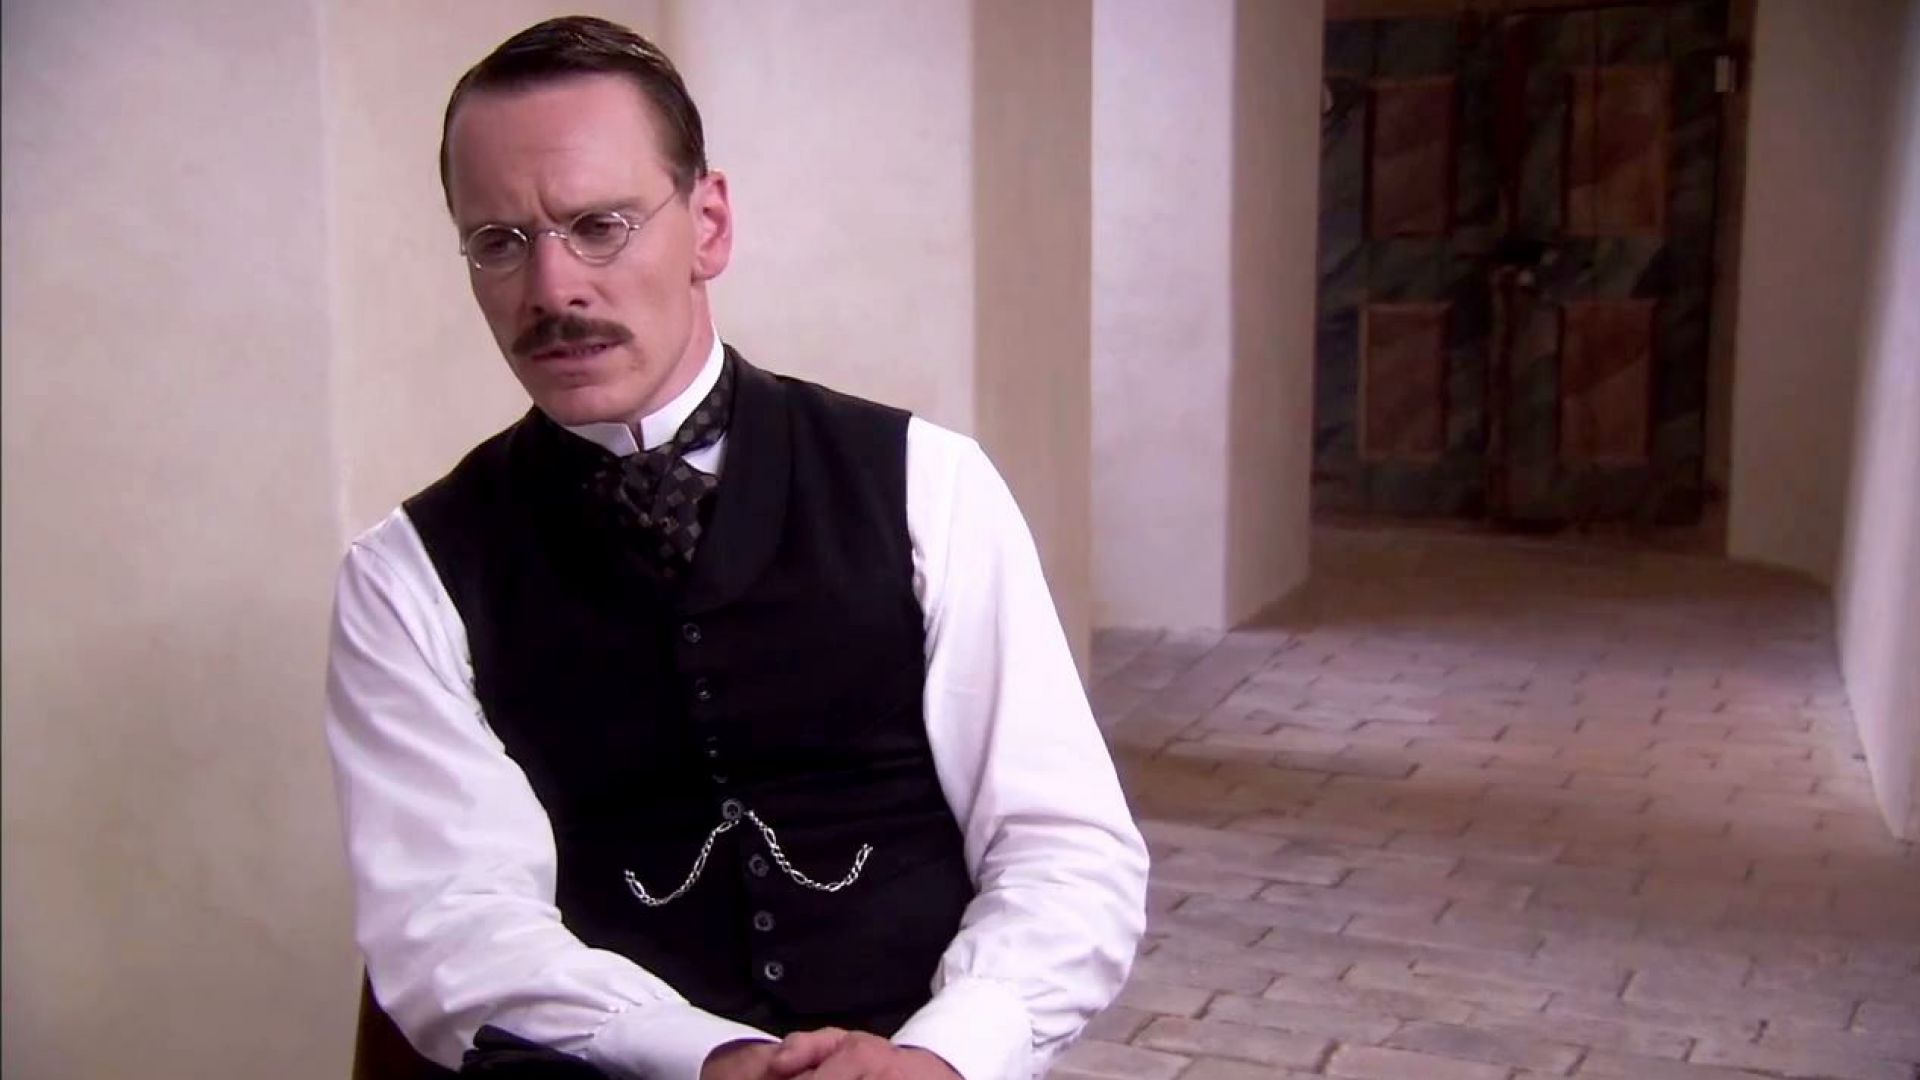 Michael Fassbender talks about lust, jealousy and egos in A Dangerous Method